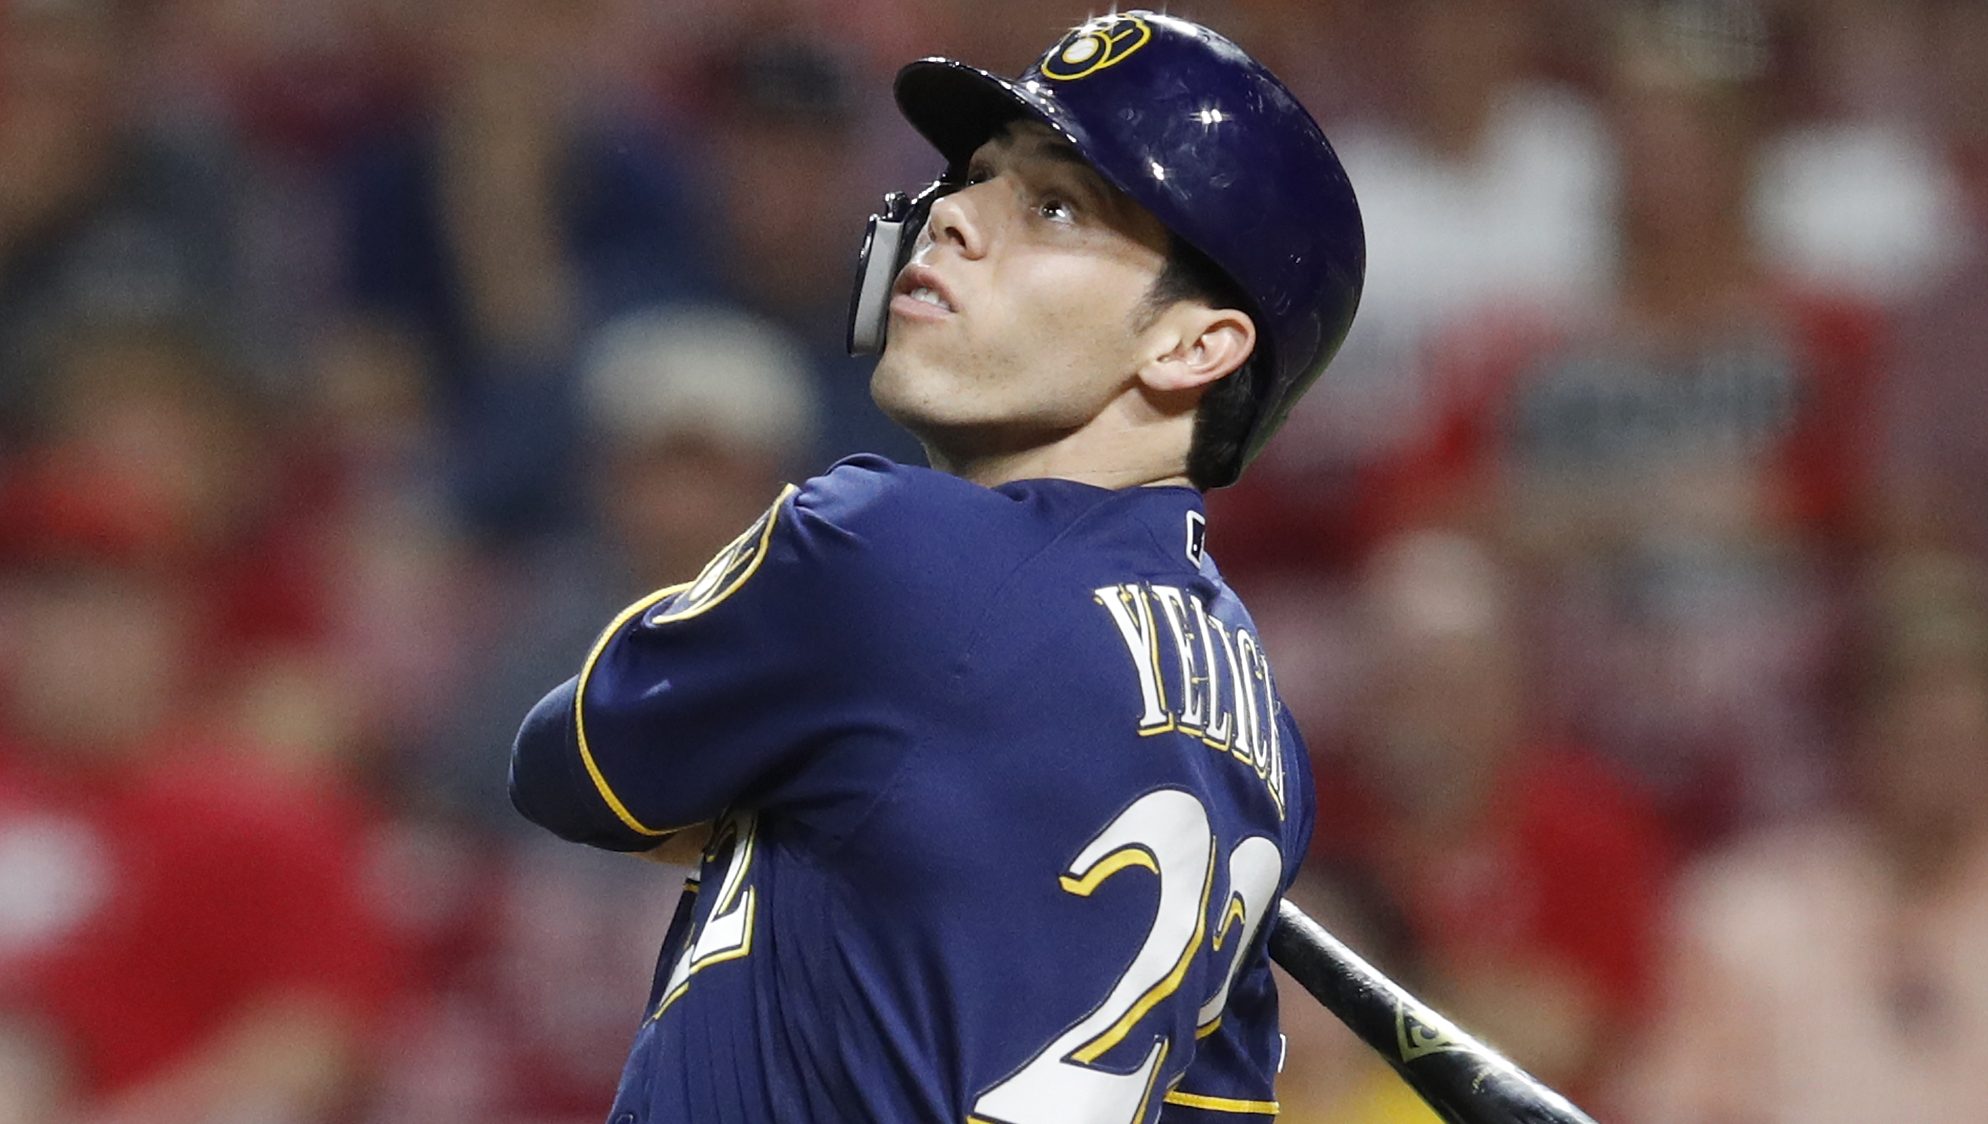 Christian Yelich Home Run Derby Where Is Brewers OF?